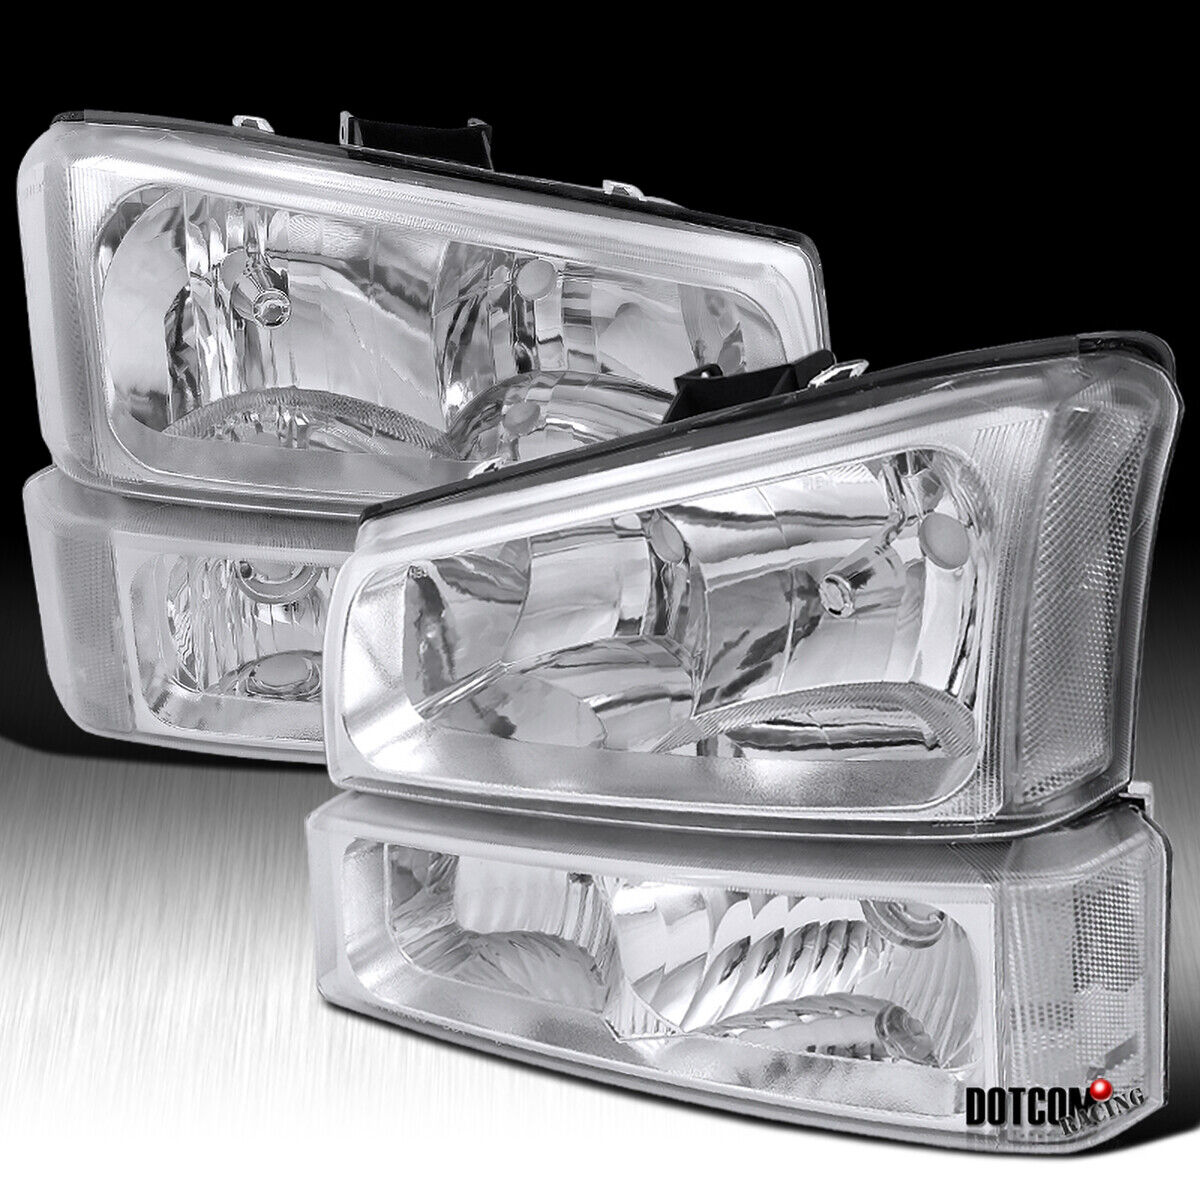 Fit 2003-2006 Chevy Silverado Crystal Clear Headlights Bumper Lamps Left+Right